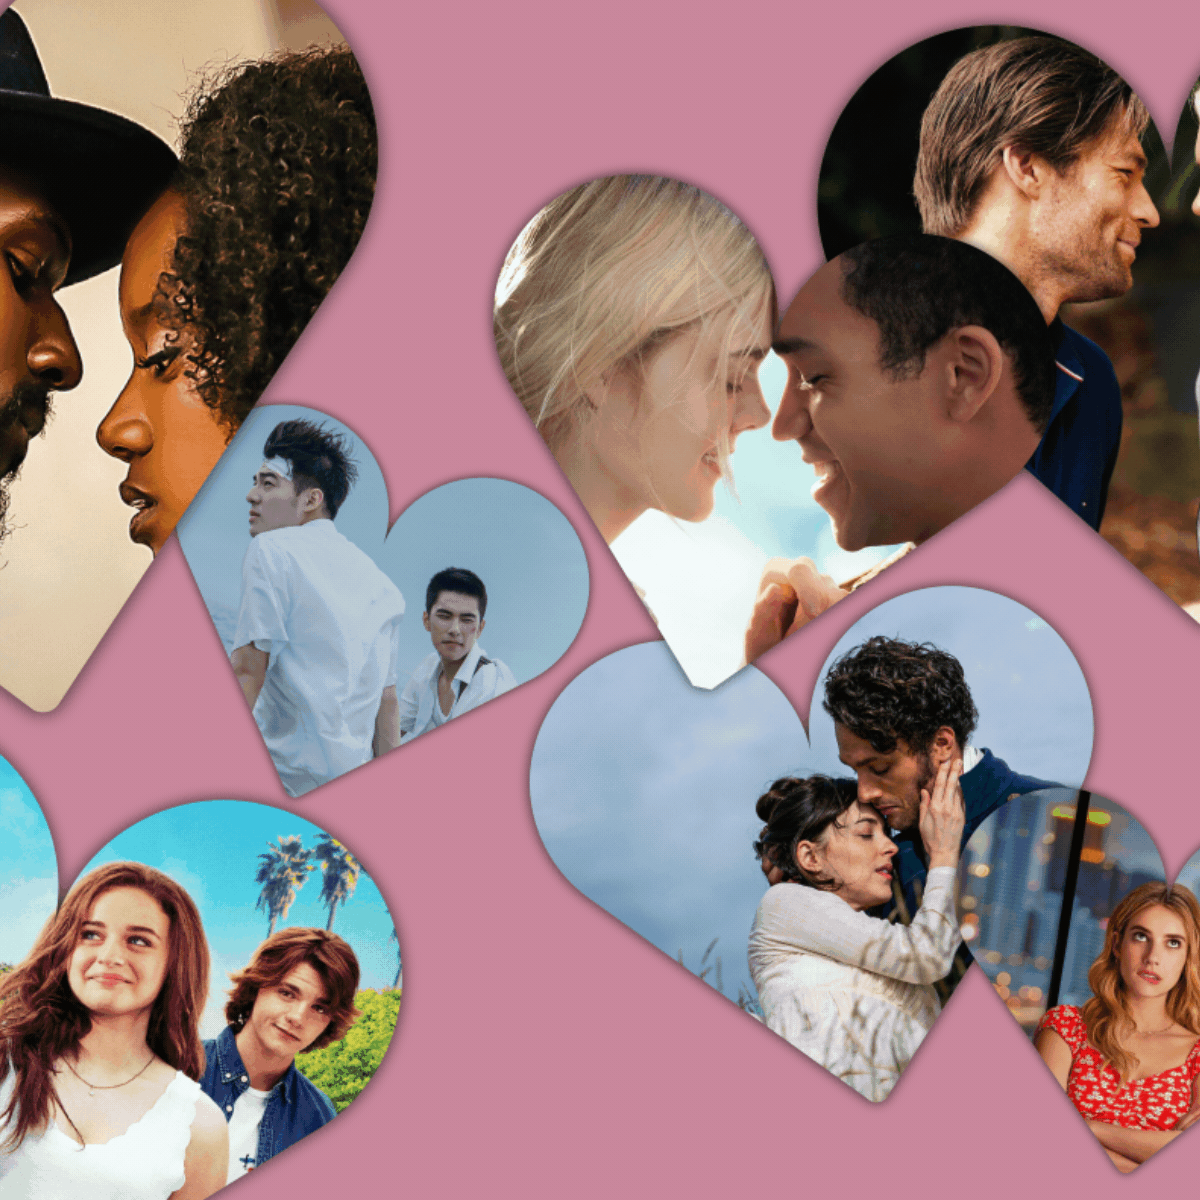 45 Best Romantic Movies on Netflix to Bring the Spark to Movie Night